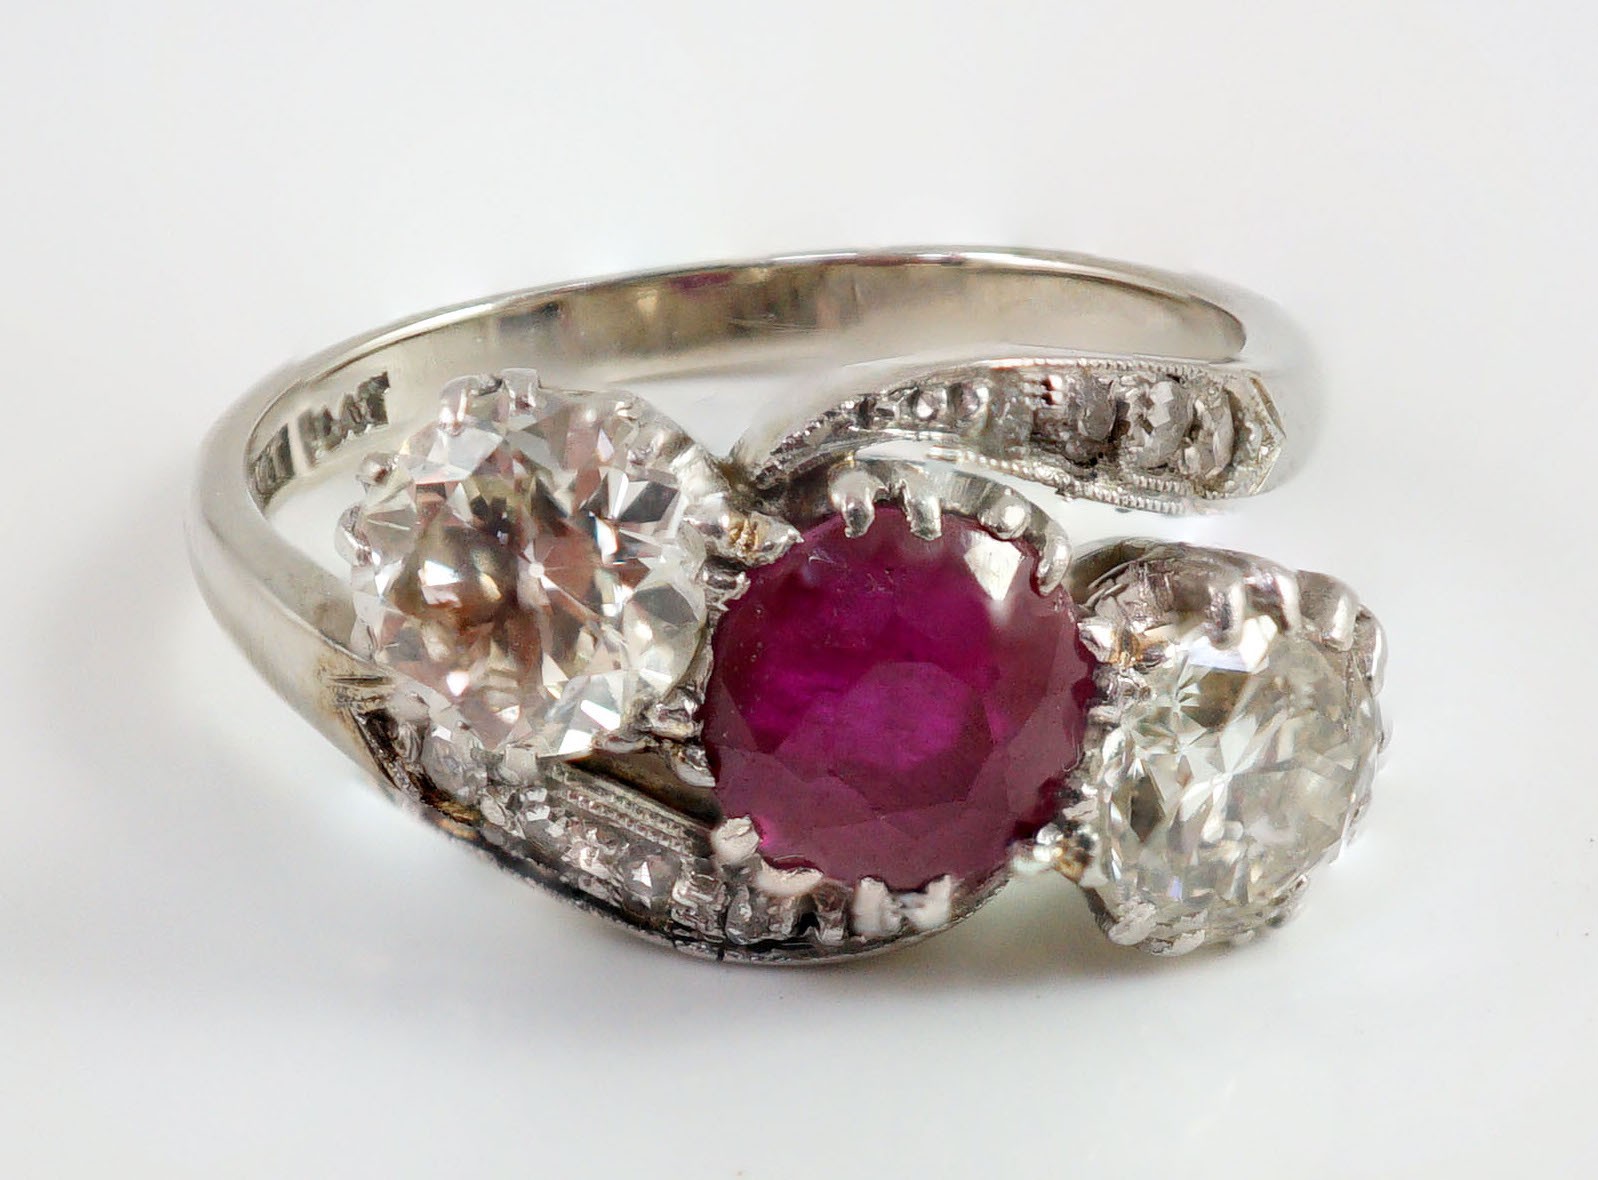 An 18ct white gold and platinum, two stone diamond and single stone synthetic? ruby set crossover ring, with diamond set shoulders